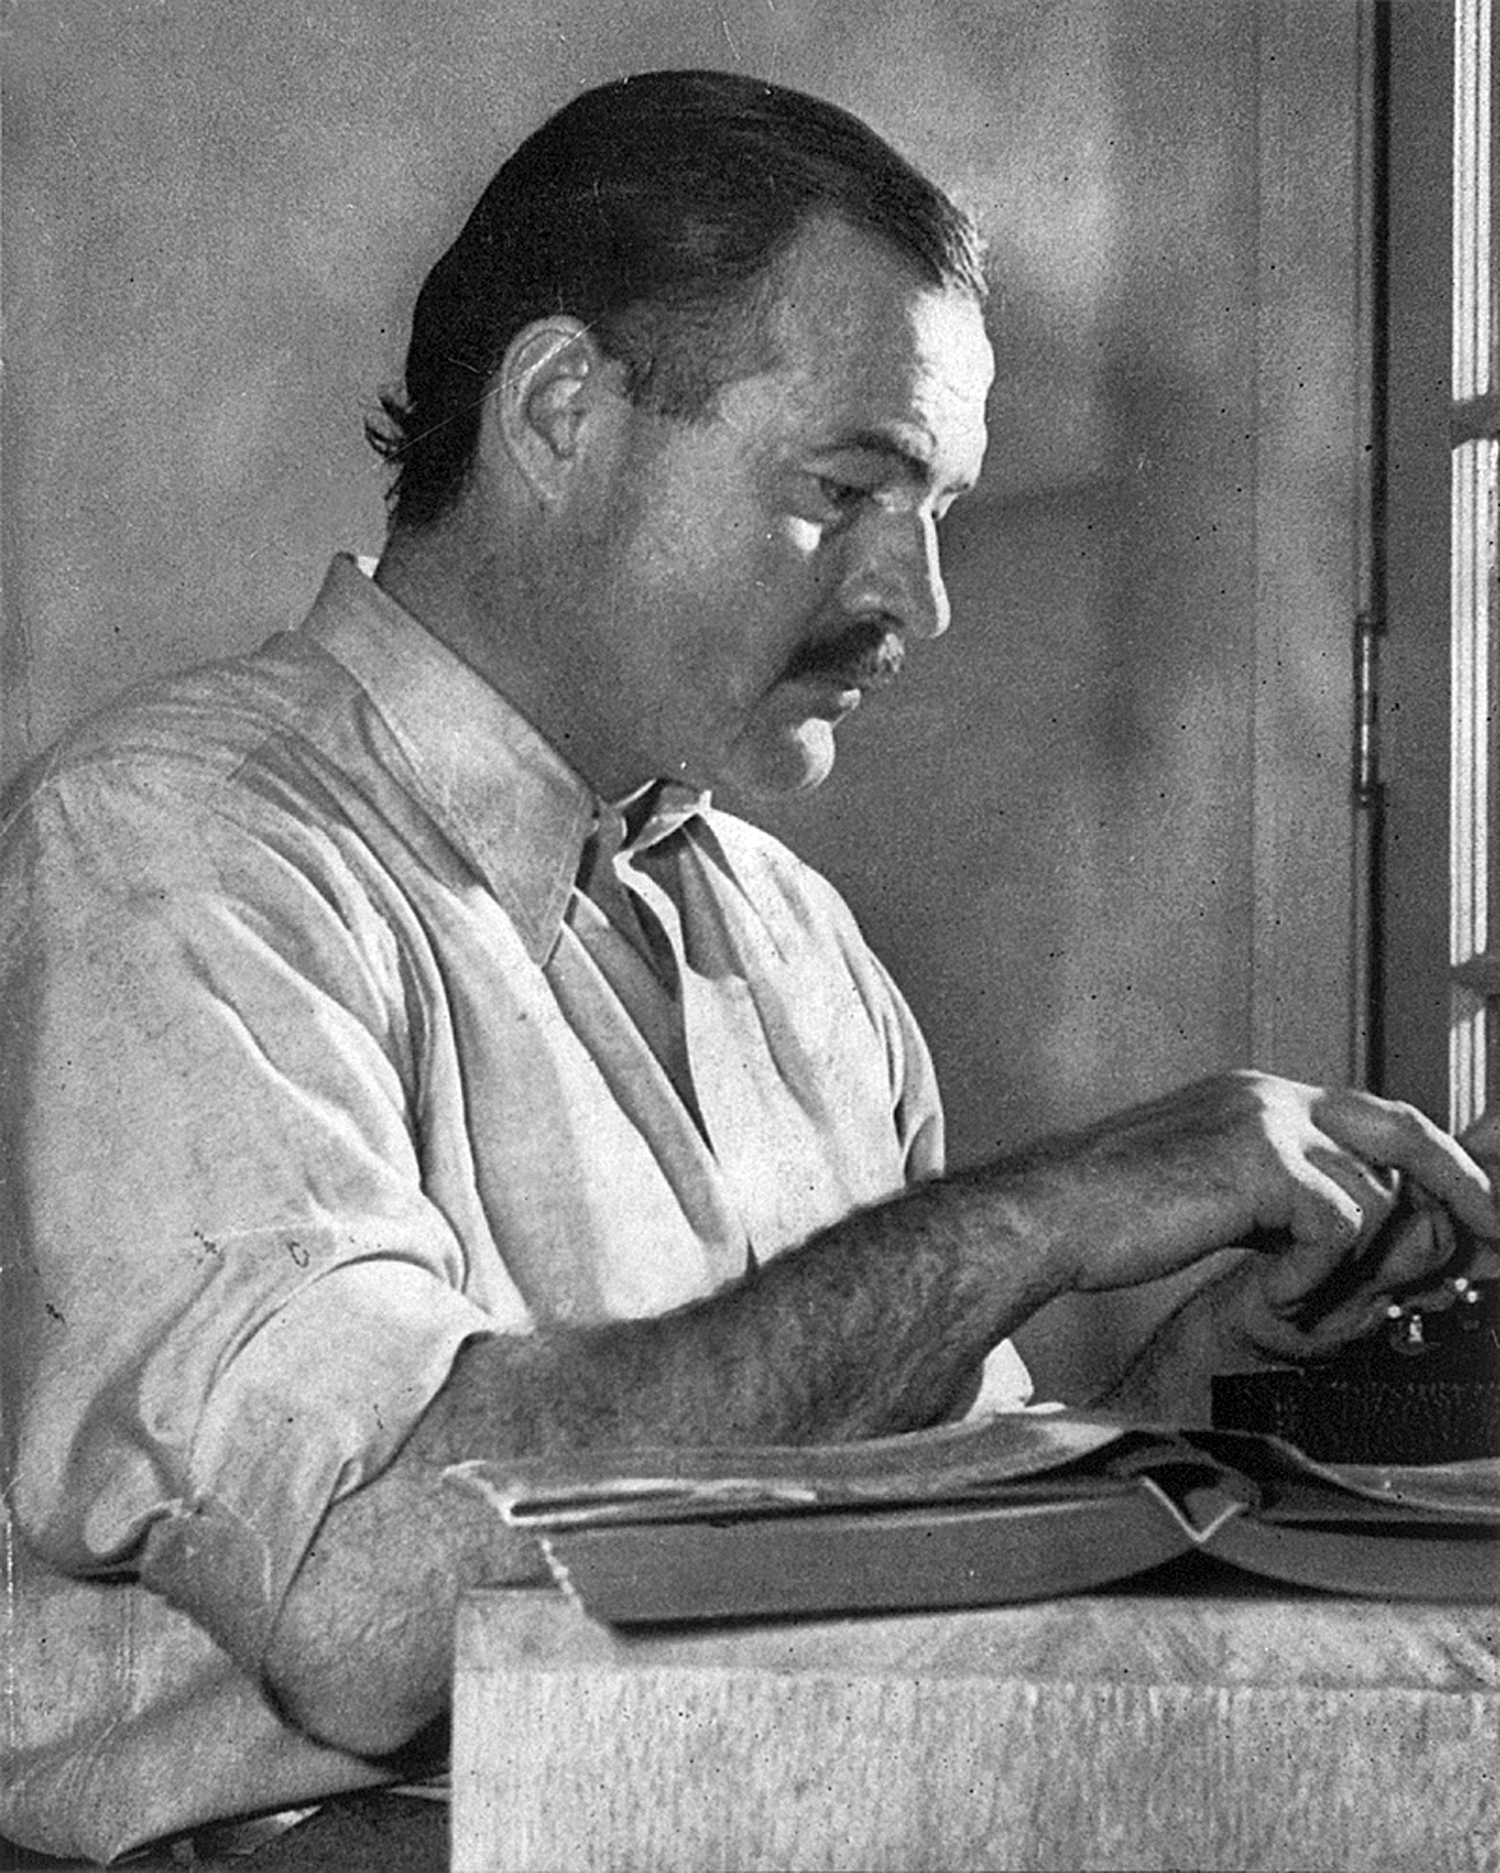 Hemingway posing for a dust jacket photo by Ll...